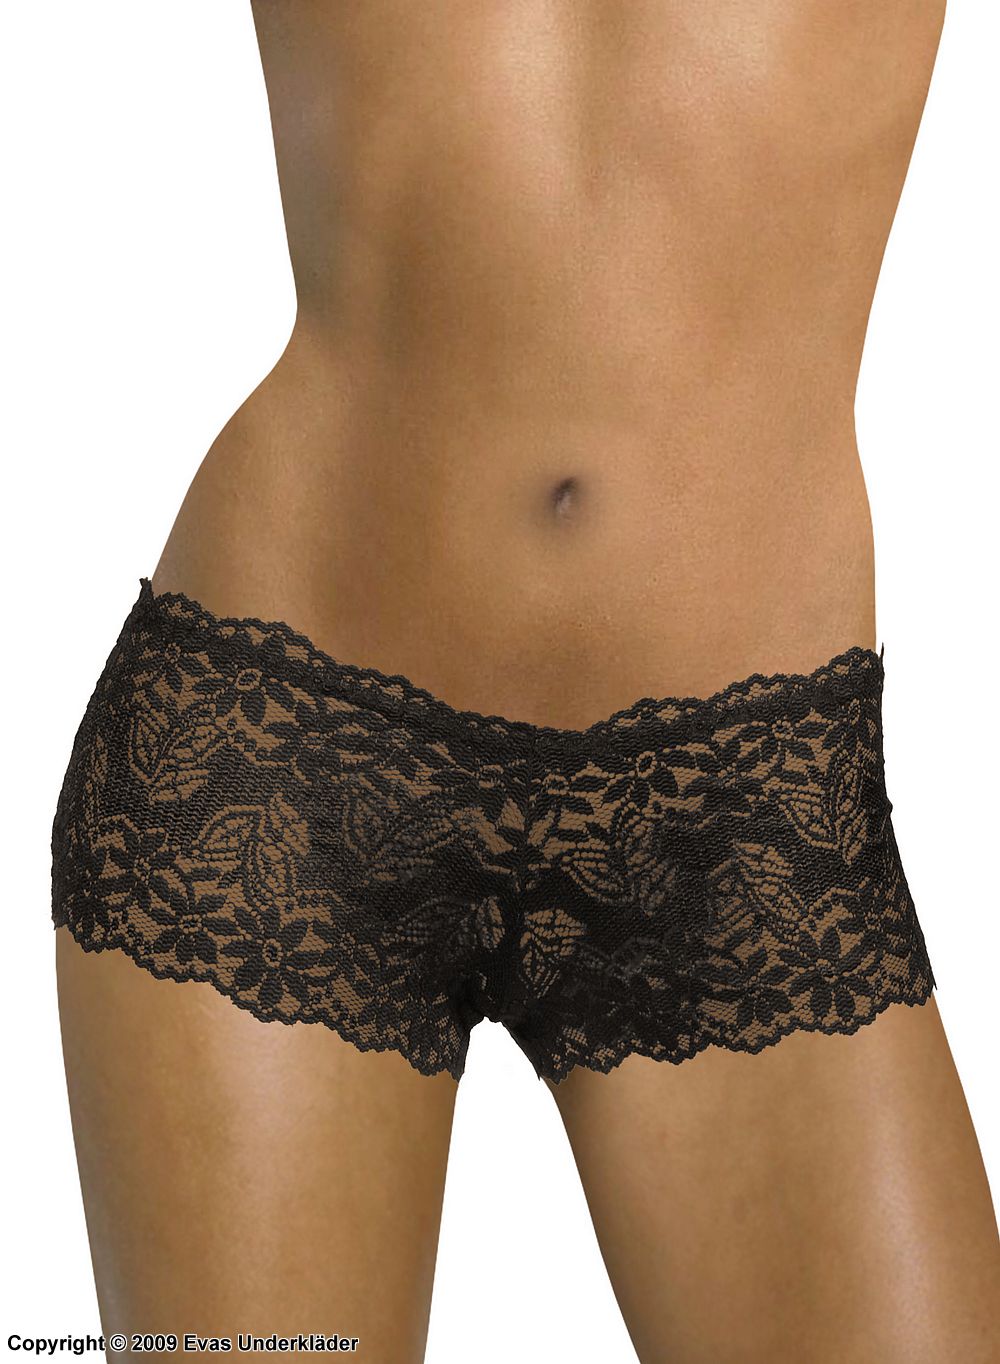 Hipster panty in stretch lace